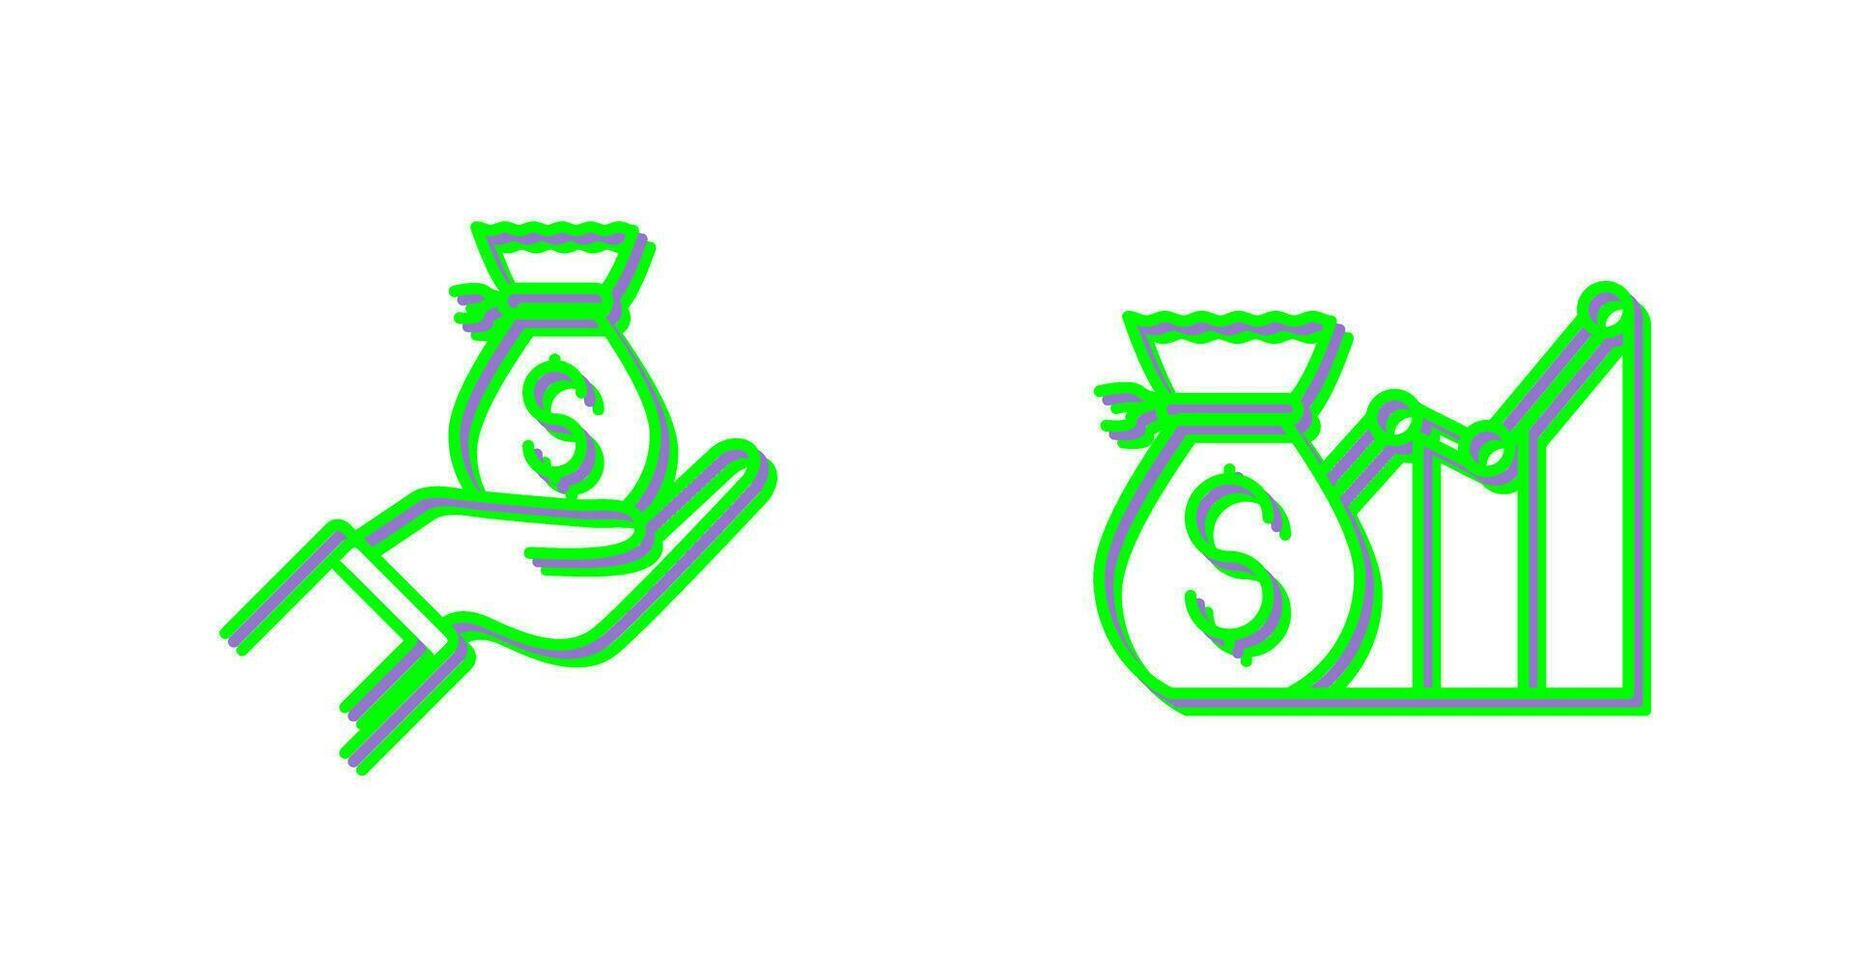 Wage and Email Icon vector